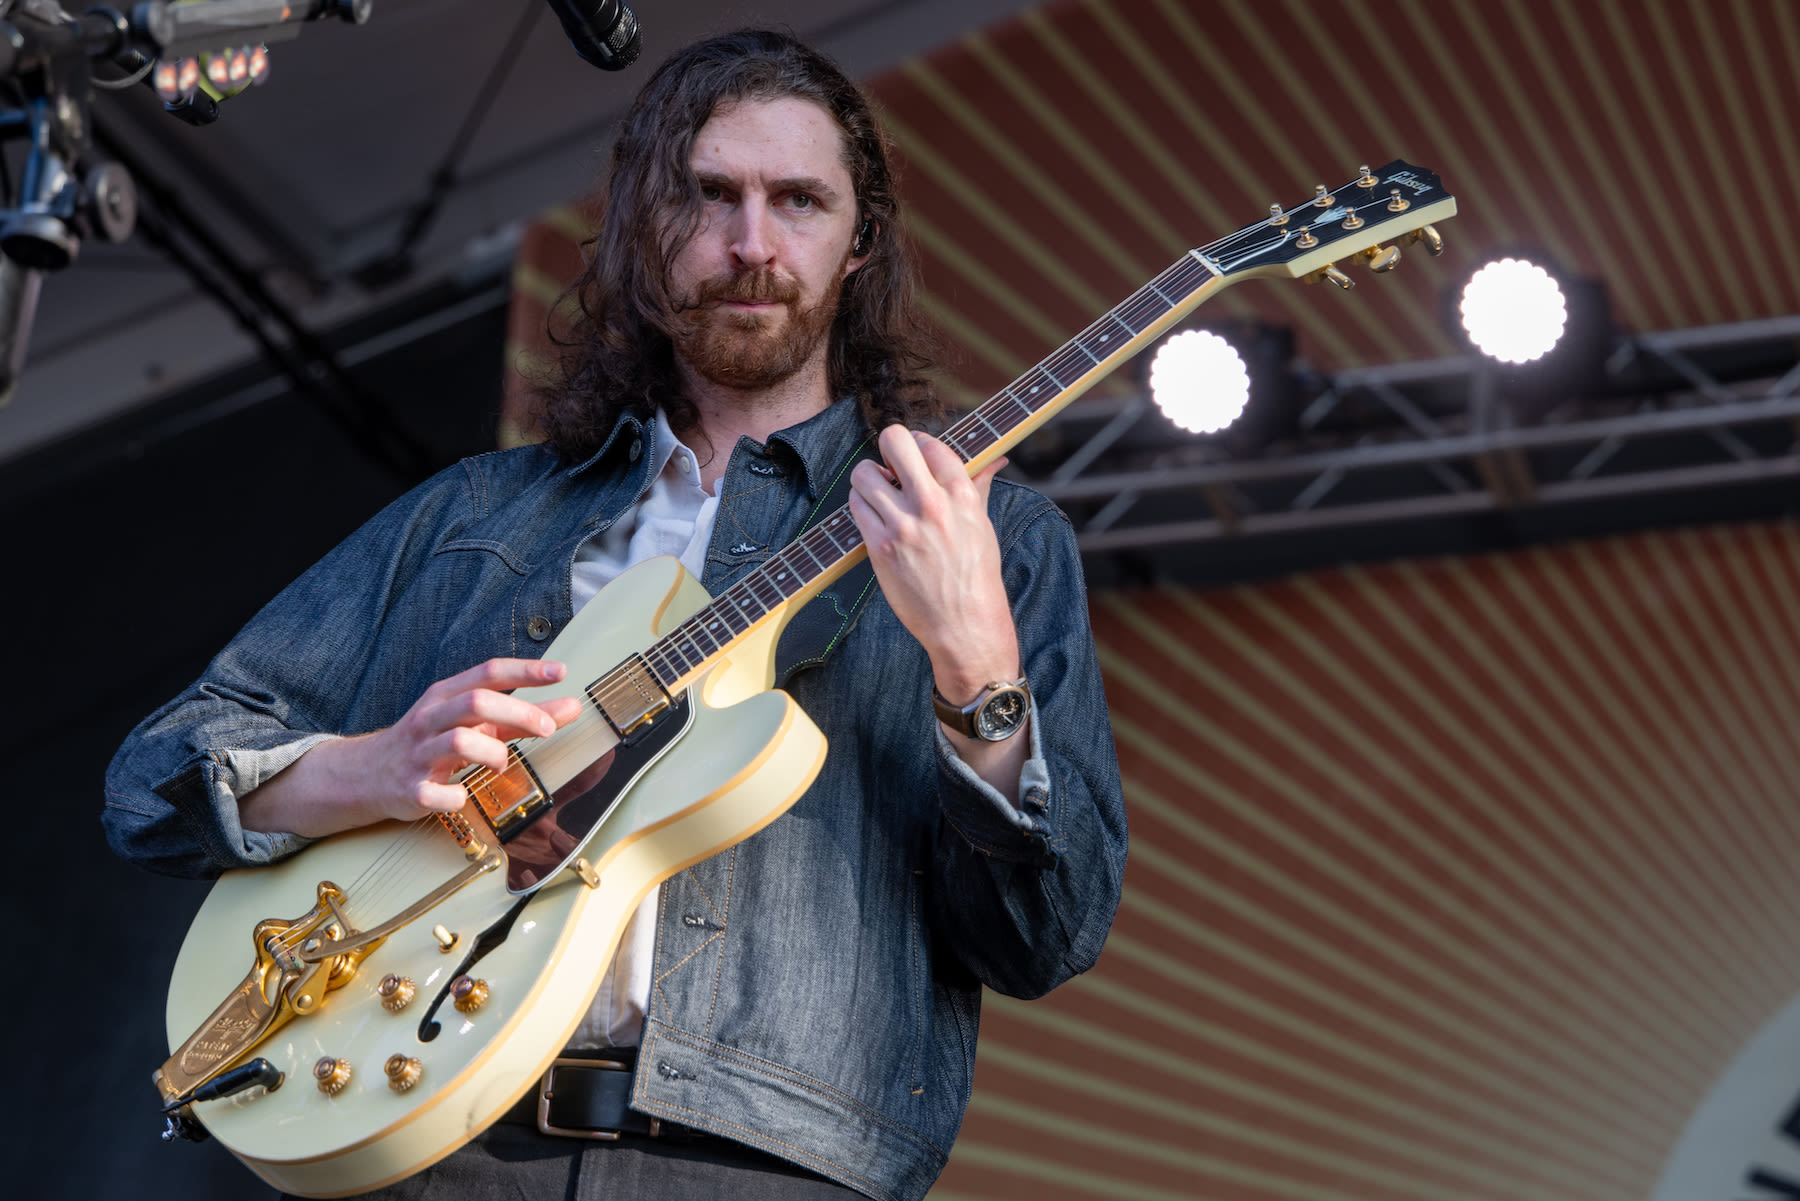 Watch Hozier Sing ‘The Weight’ With Mavis Staples and Joan Baez at Newport Folk Festival